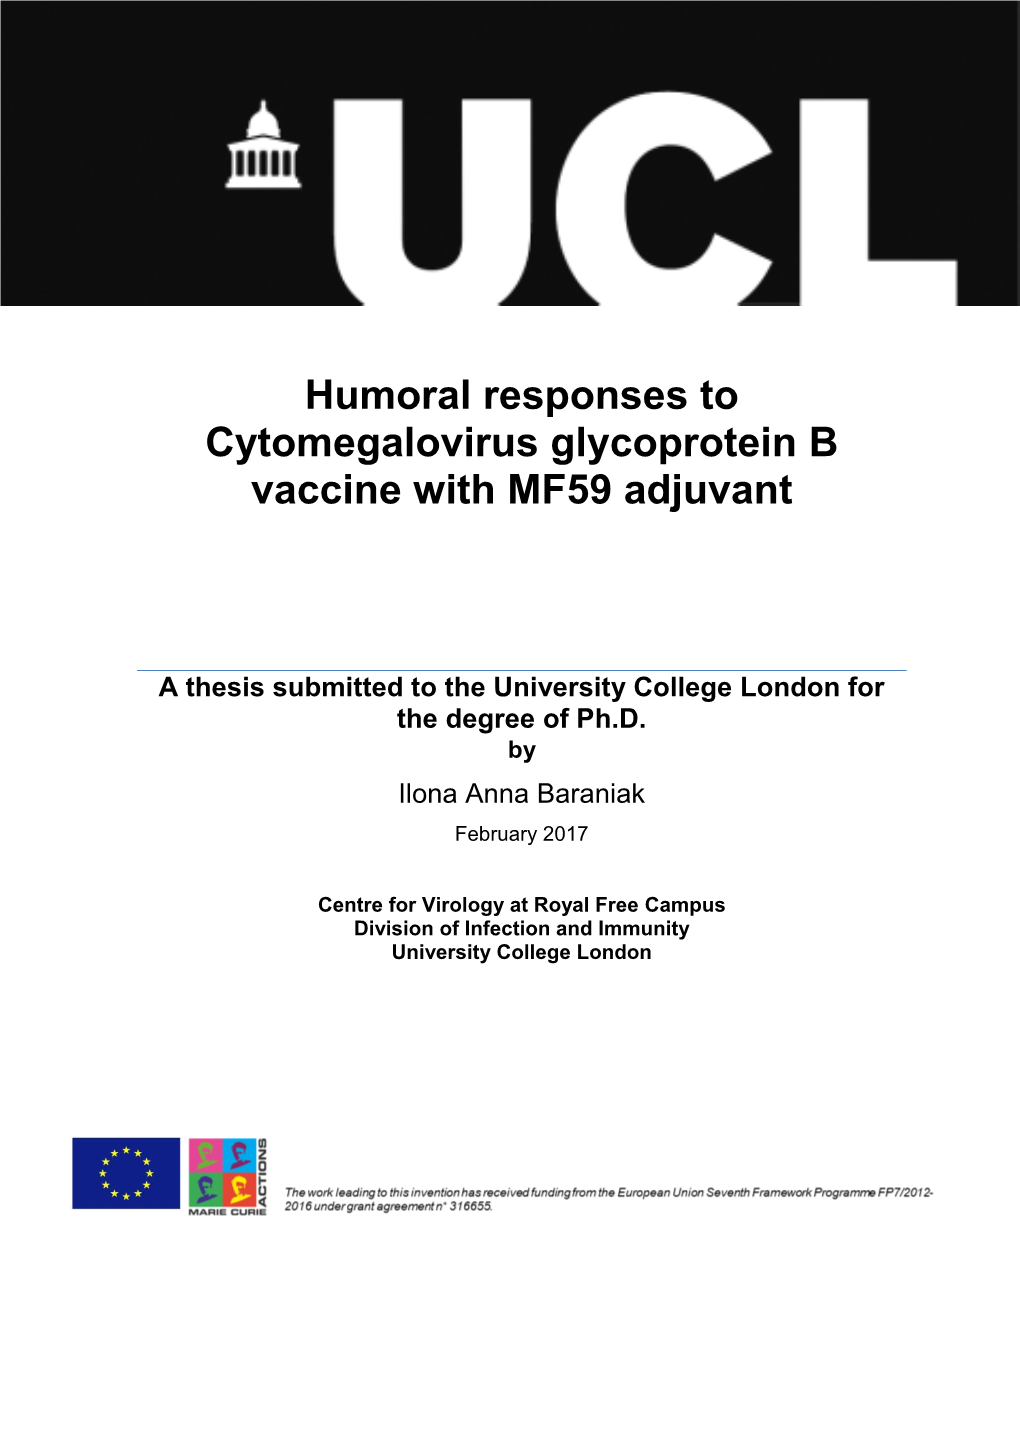 Humoral Responses to Cytomegalovirus Glycoprotein B Vaccine with MF59 Adjuvant